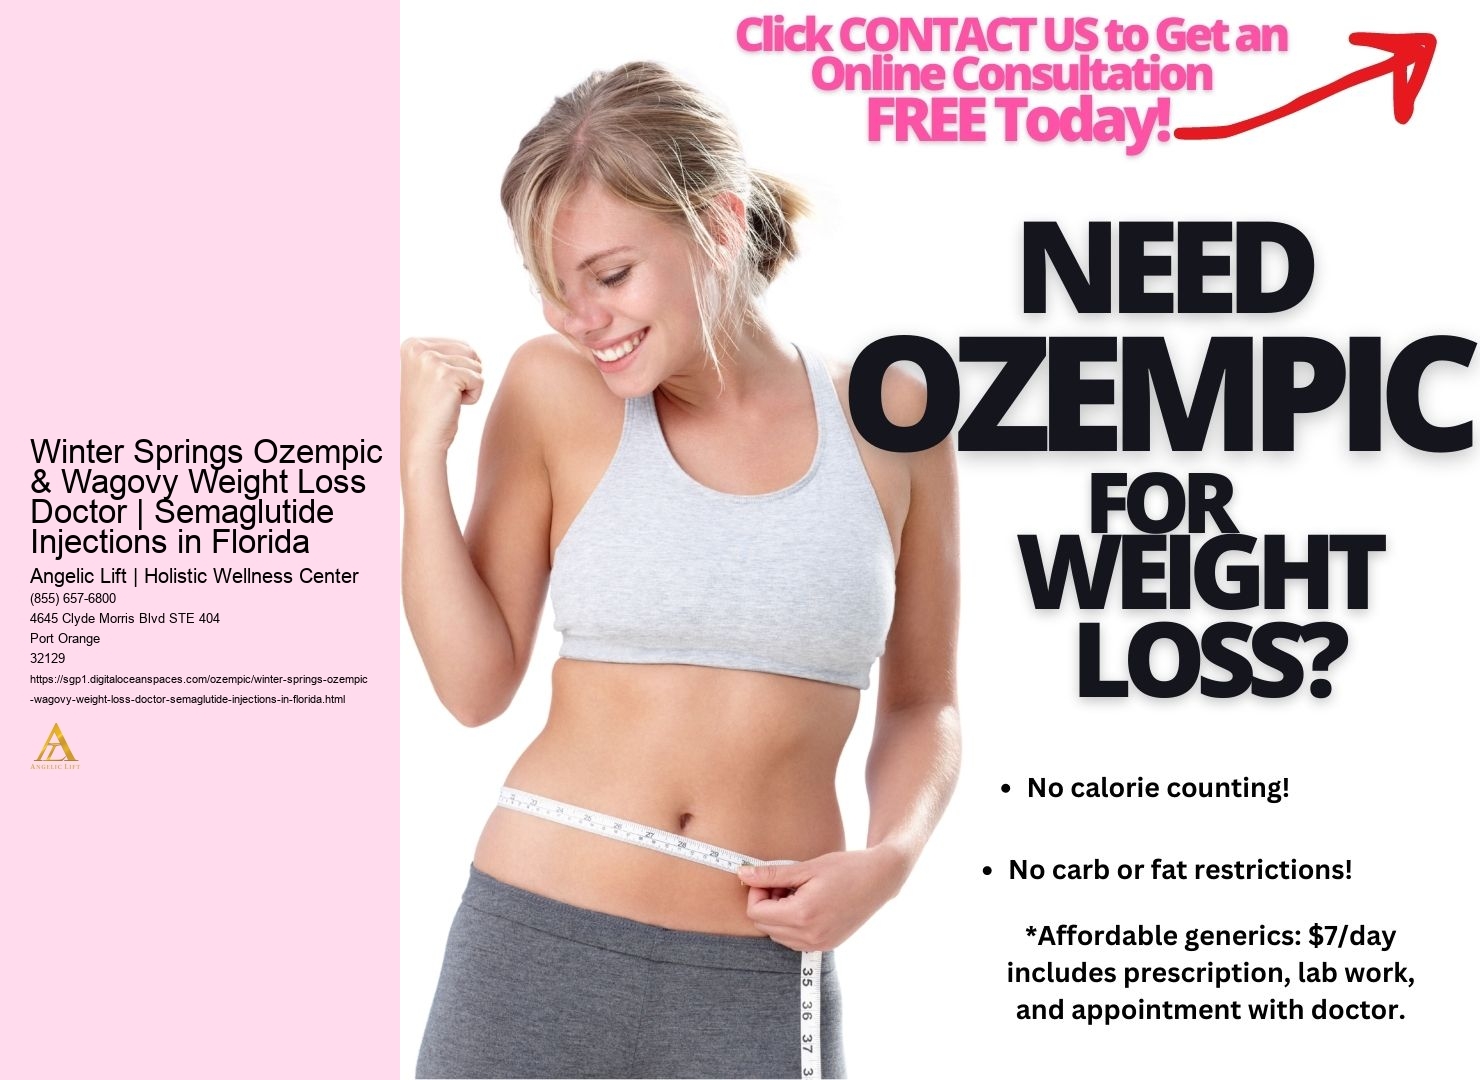 Winter Springs Ozempic & Wagovy Weight Loss Doctor | Semaglutide Injections in Florida